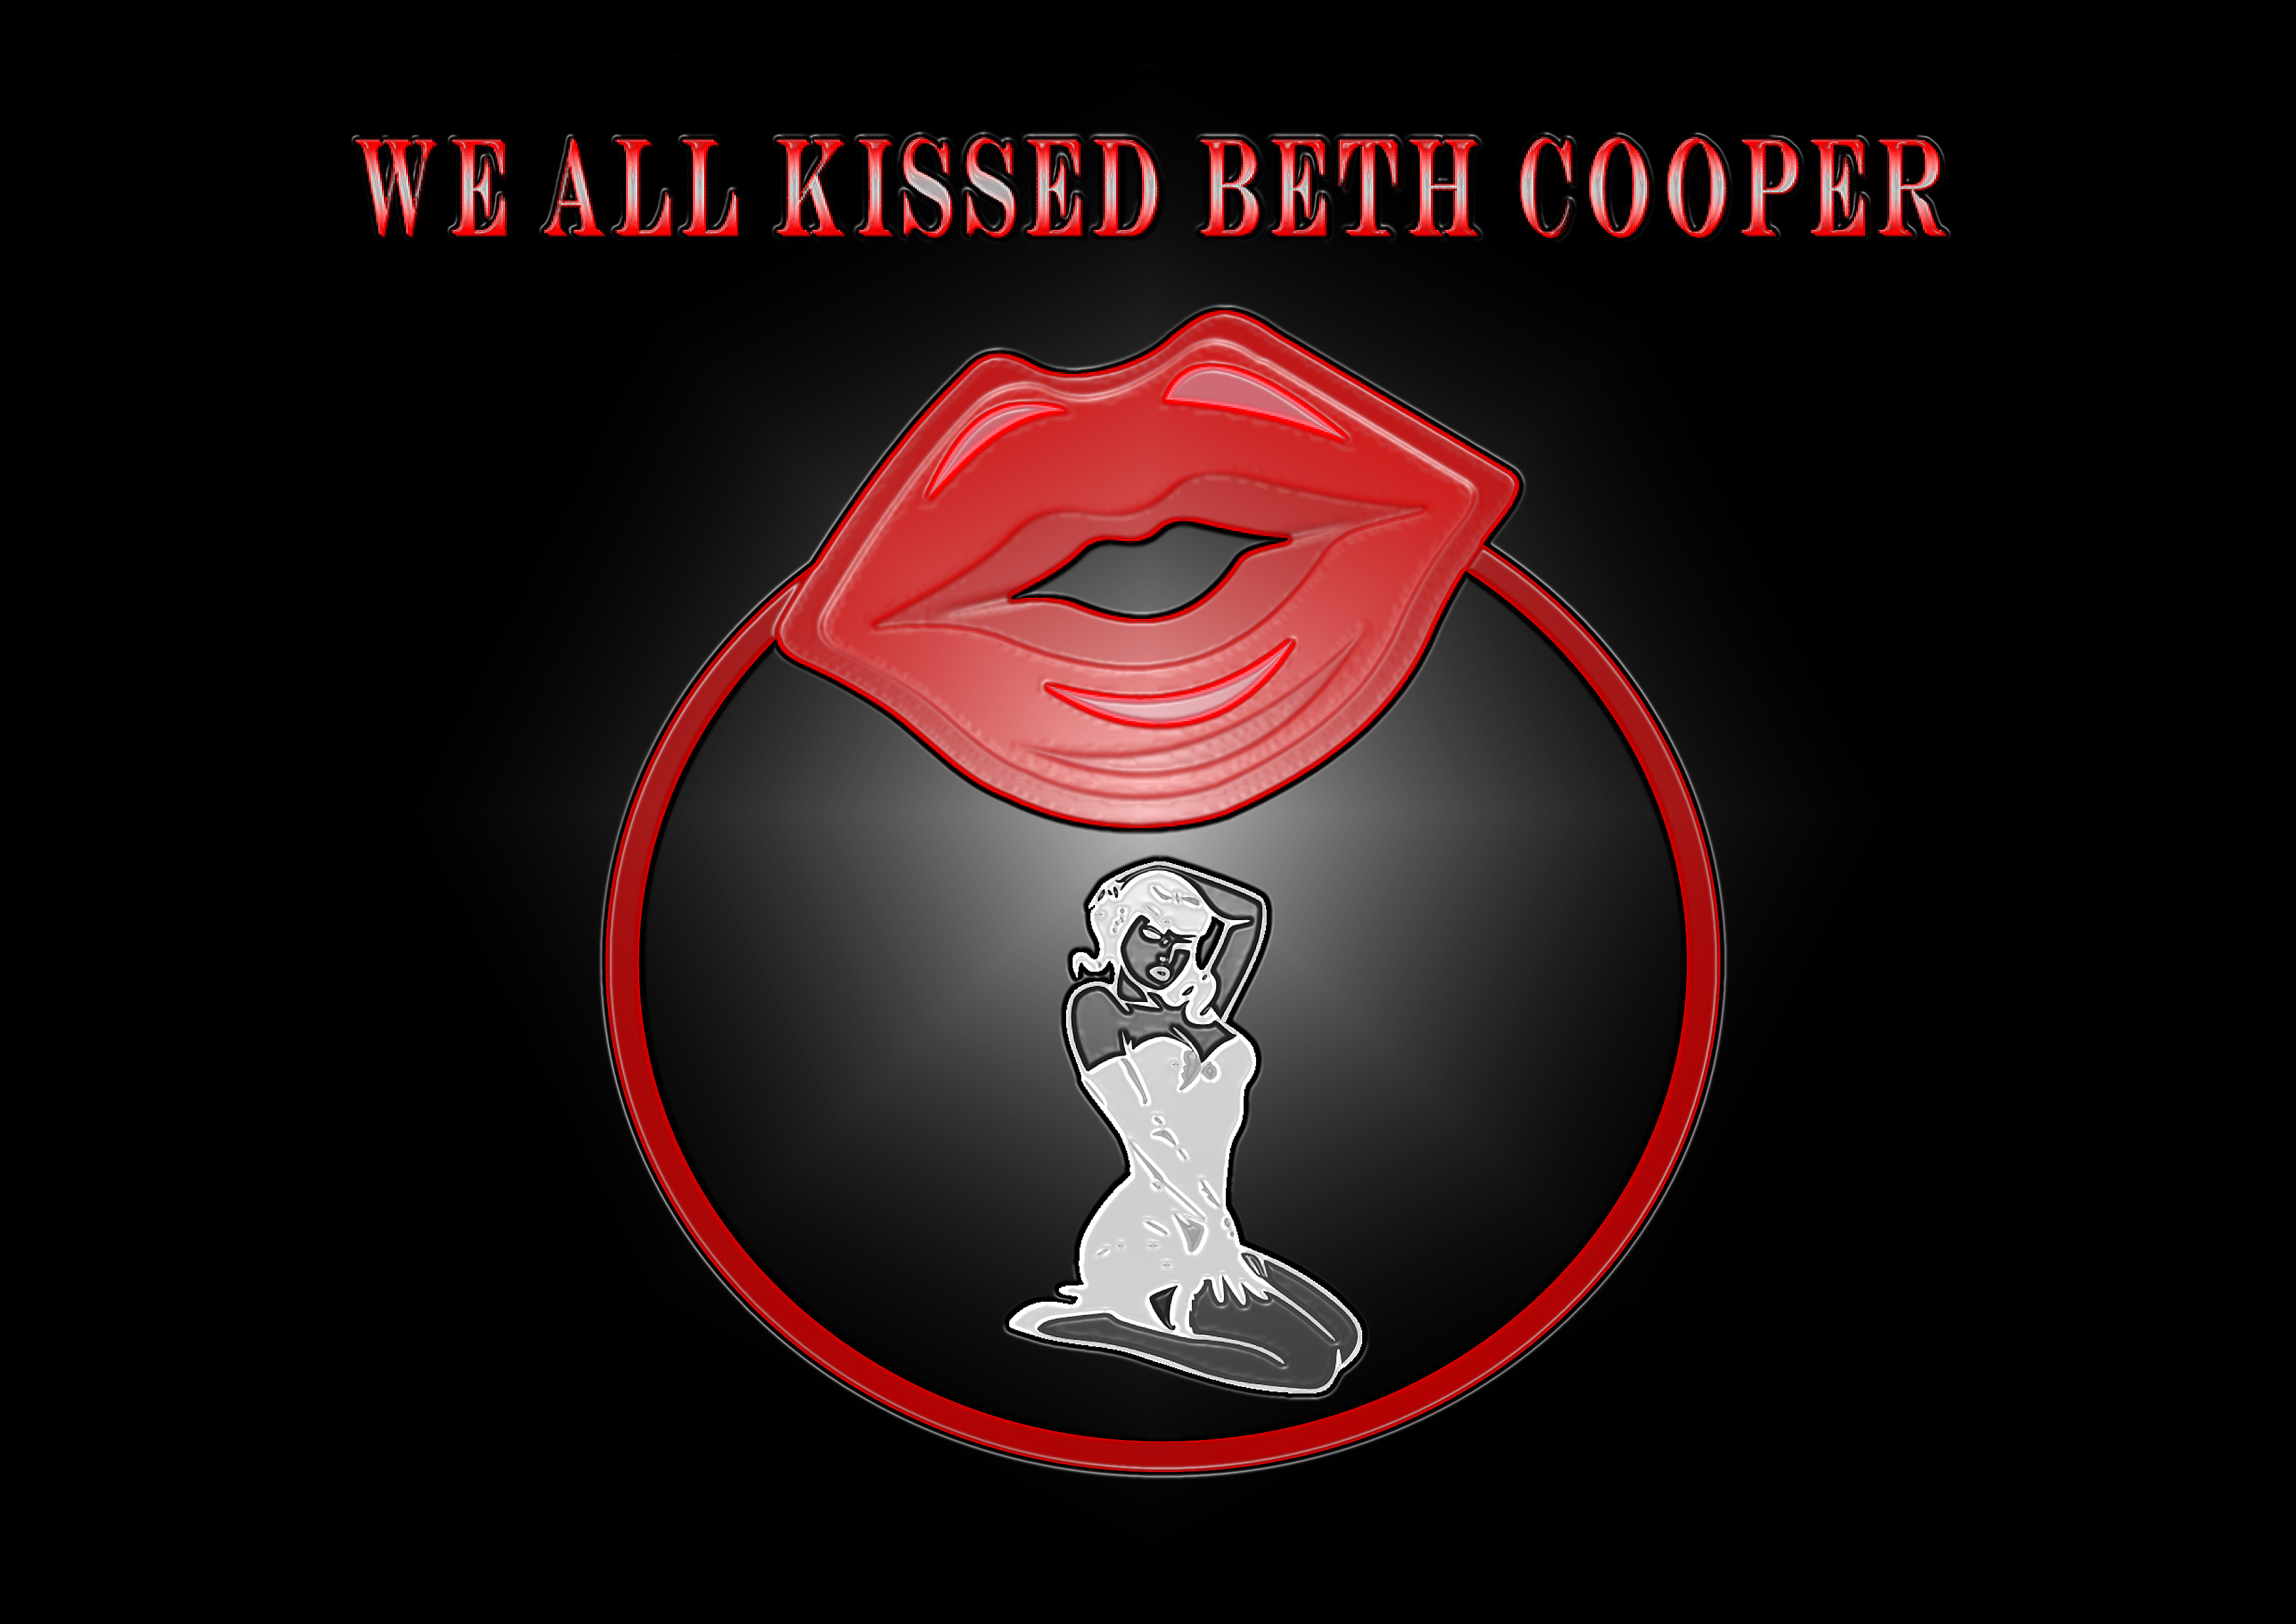 We all kissed Beth Cooper